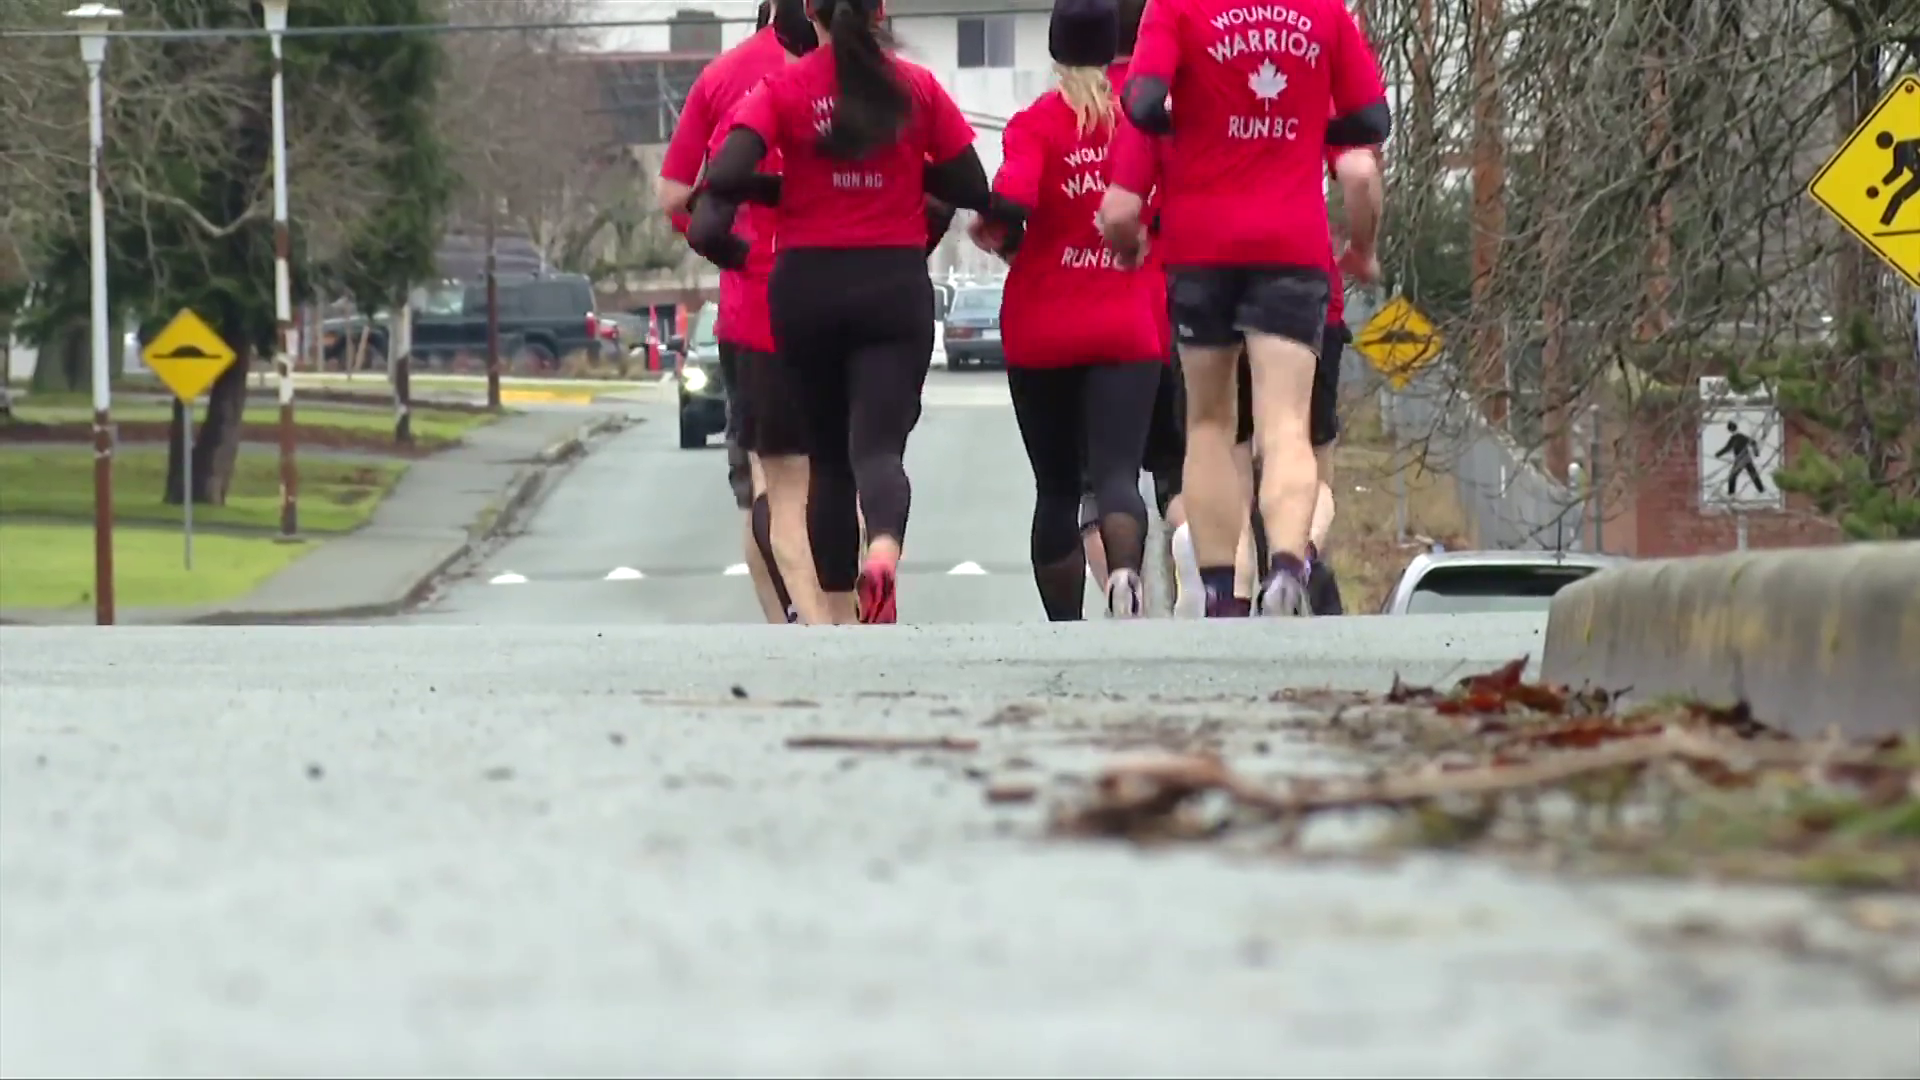 Vital People: Wounded Warrior Run raises awareness about PTSD